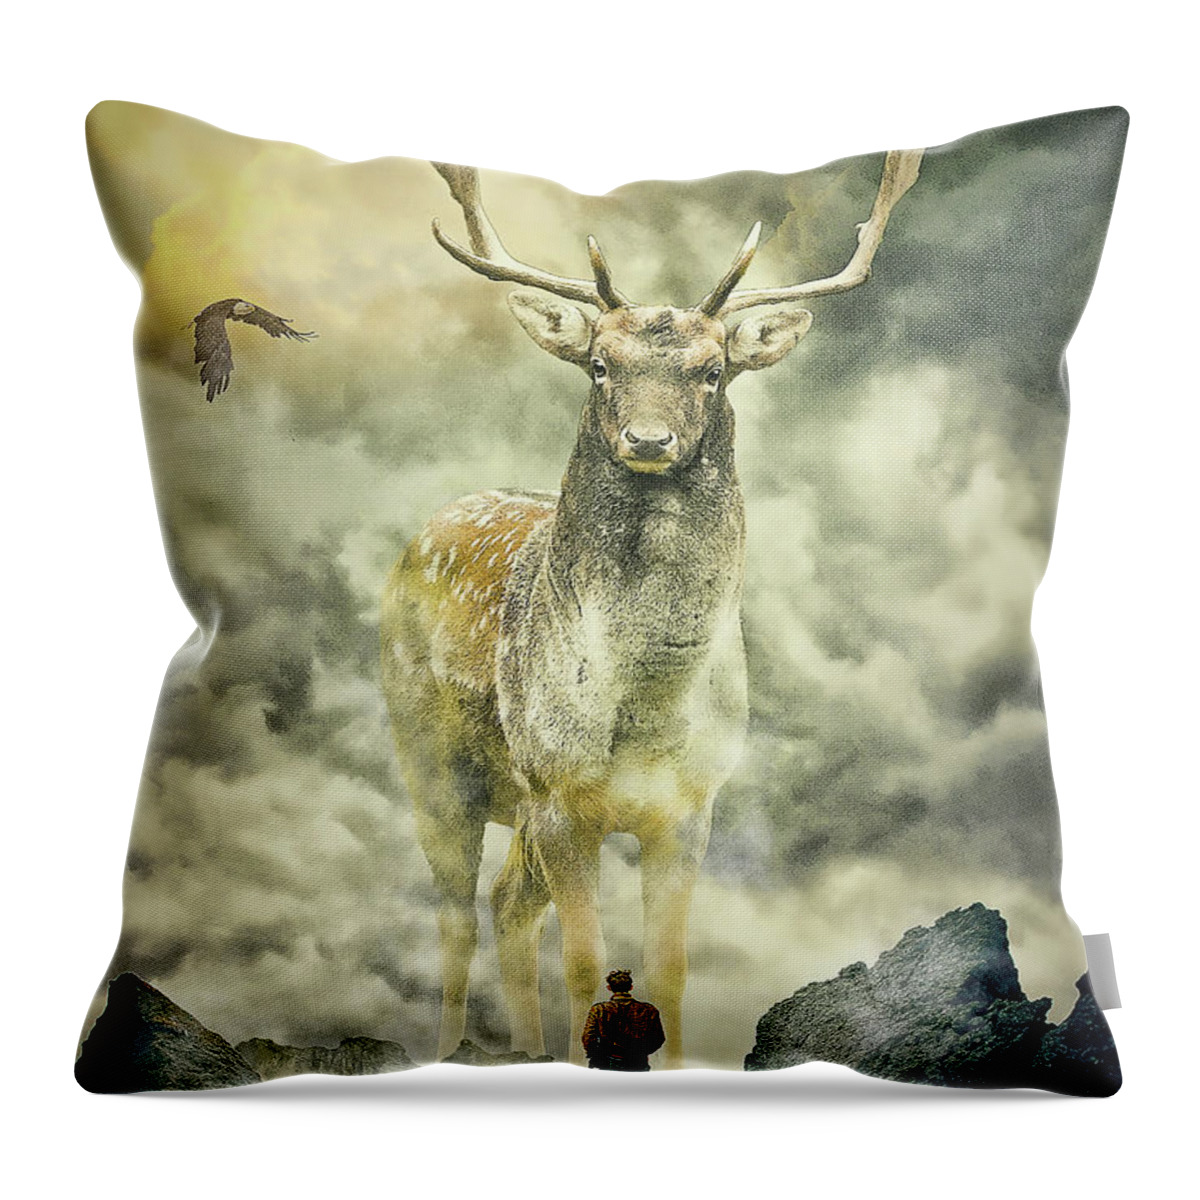 New Age Throw Pillow featuring the digital art New Age by Tom Schmidt